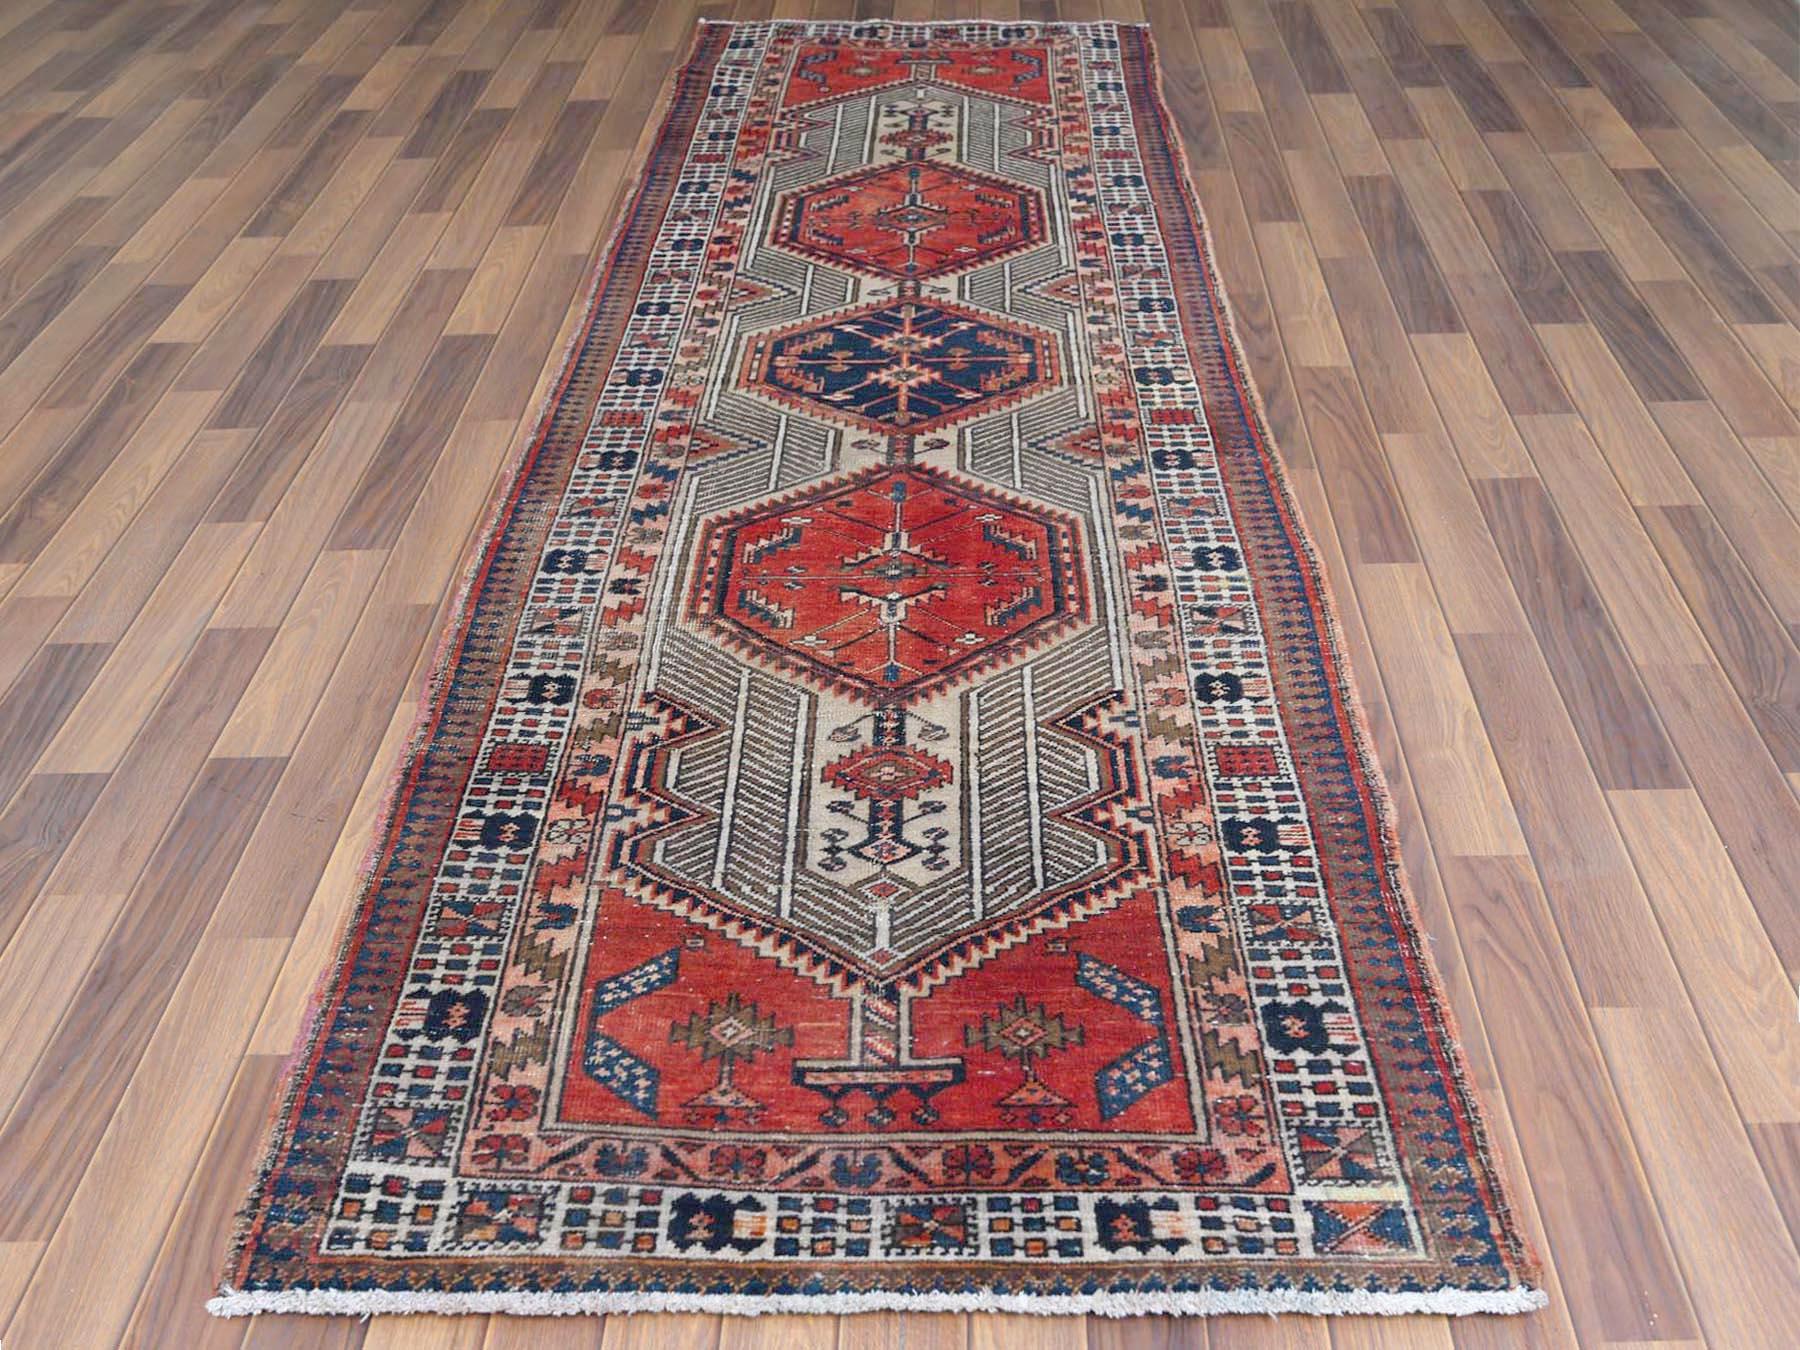 This fabulous hand-knotted carpet has been created and designed for extra strength and durability. This rug has been handcrafted for weeks in the traditional method that is used to make
Exact rug size in feet and inches : 3'5